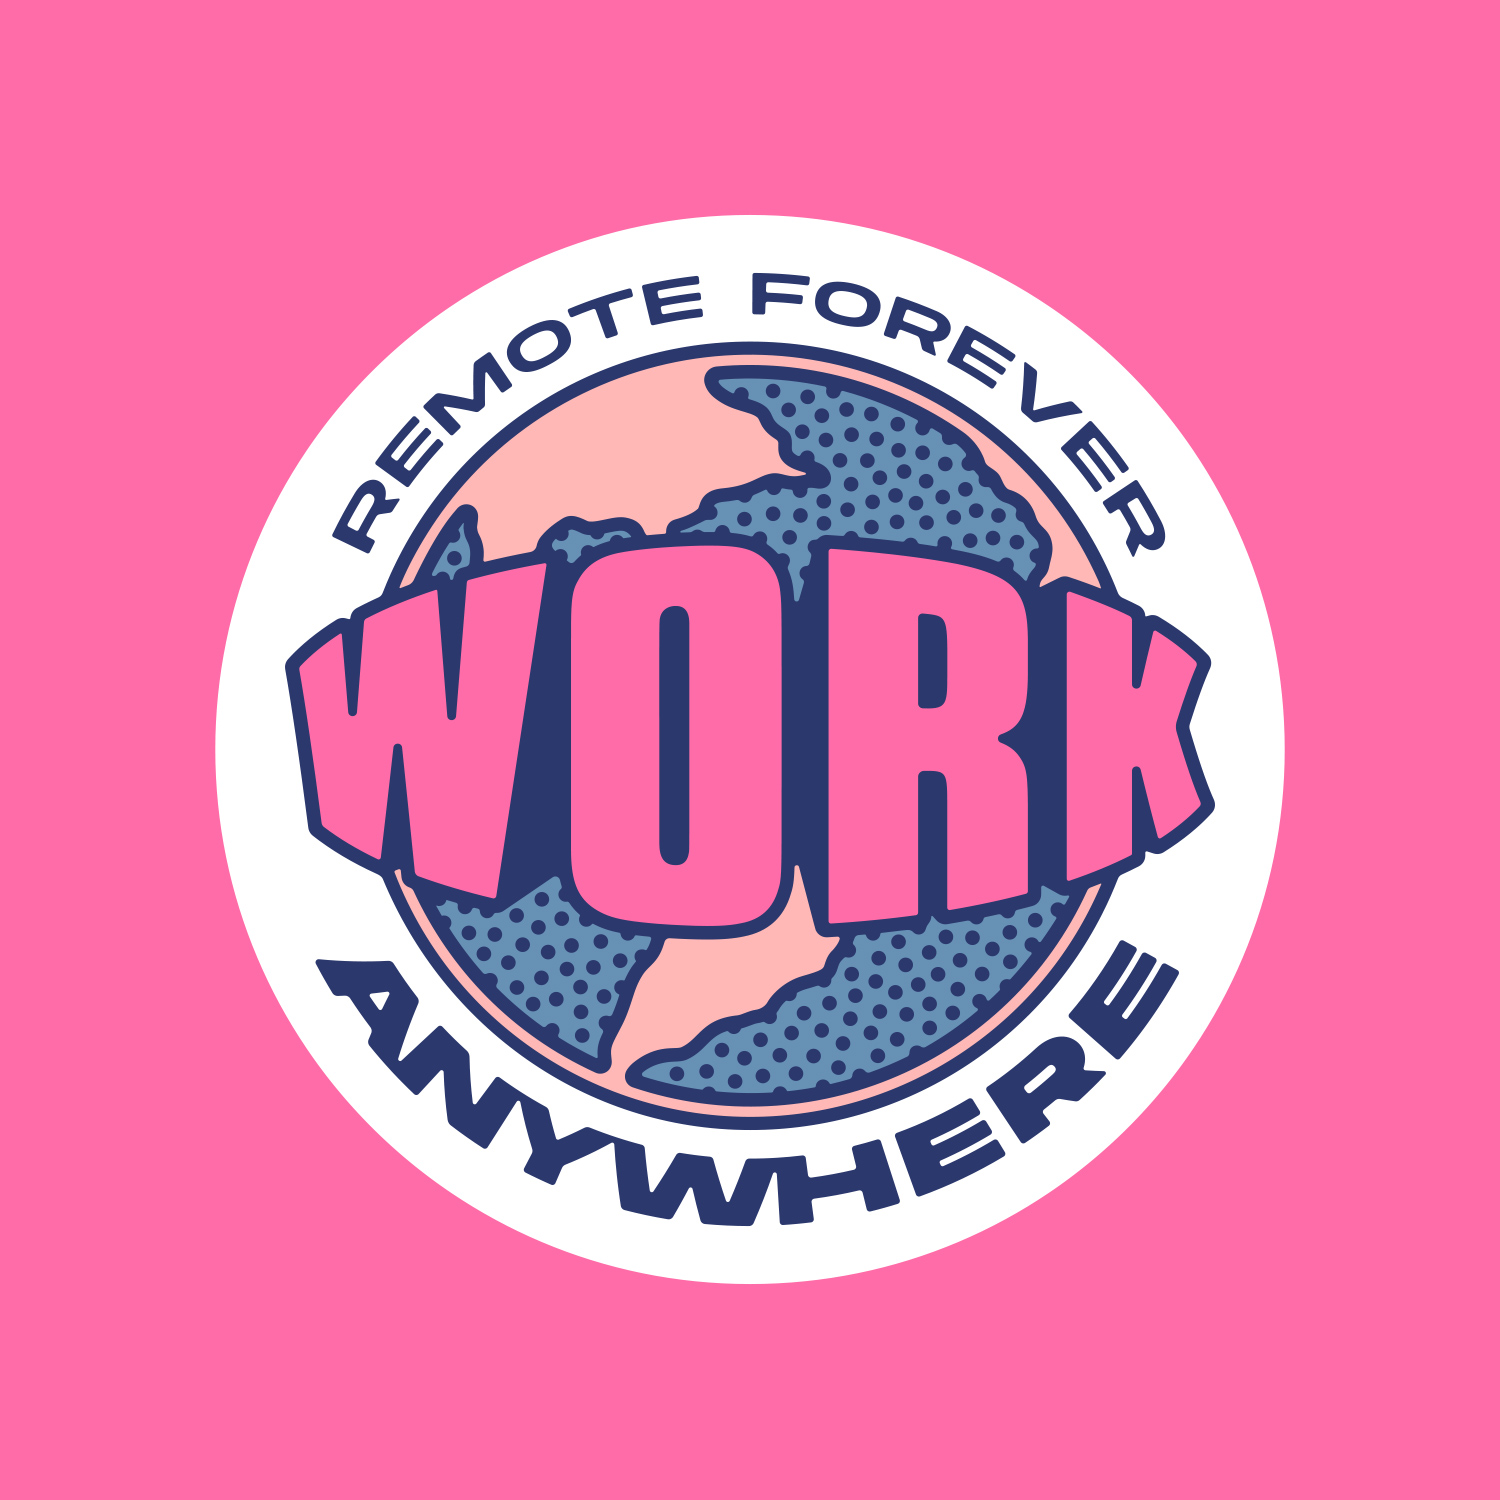 graphic with text reading "remote forever, work anywhere"